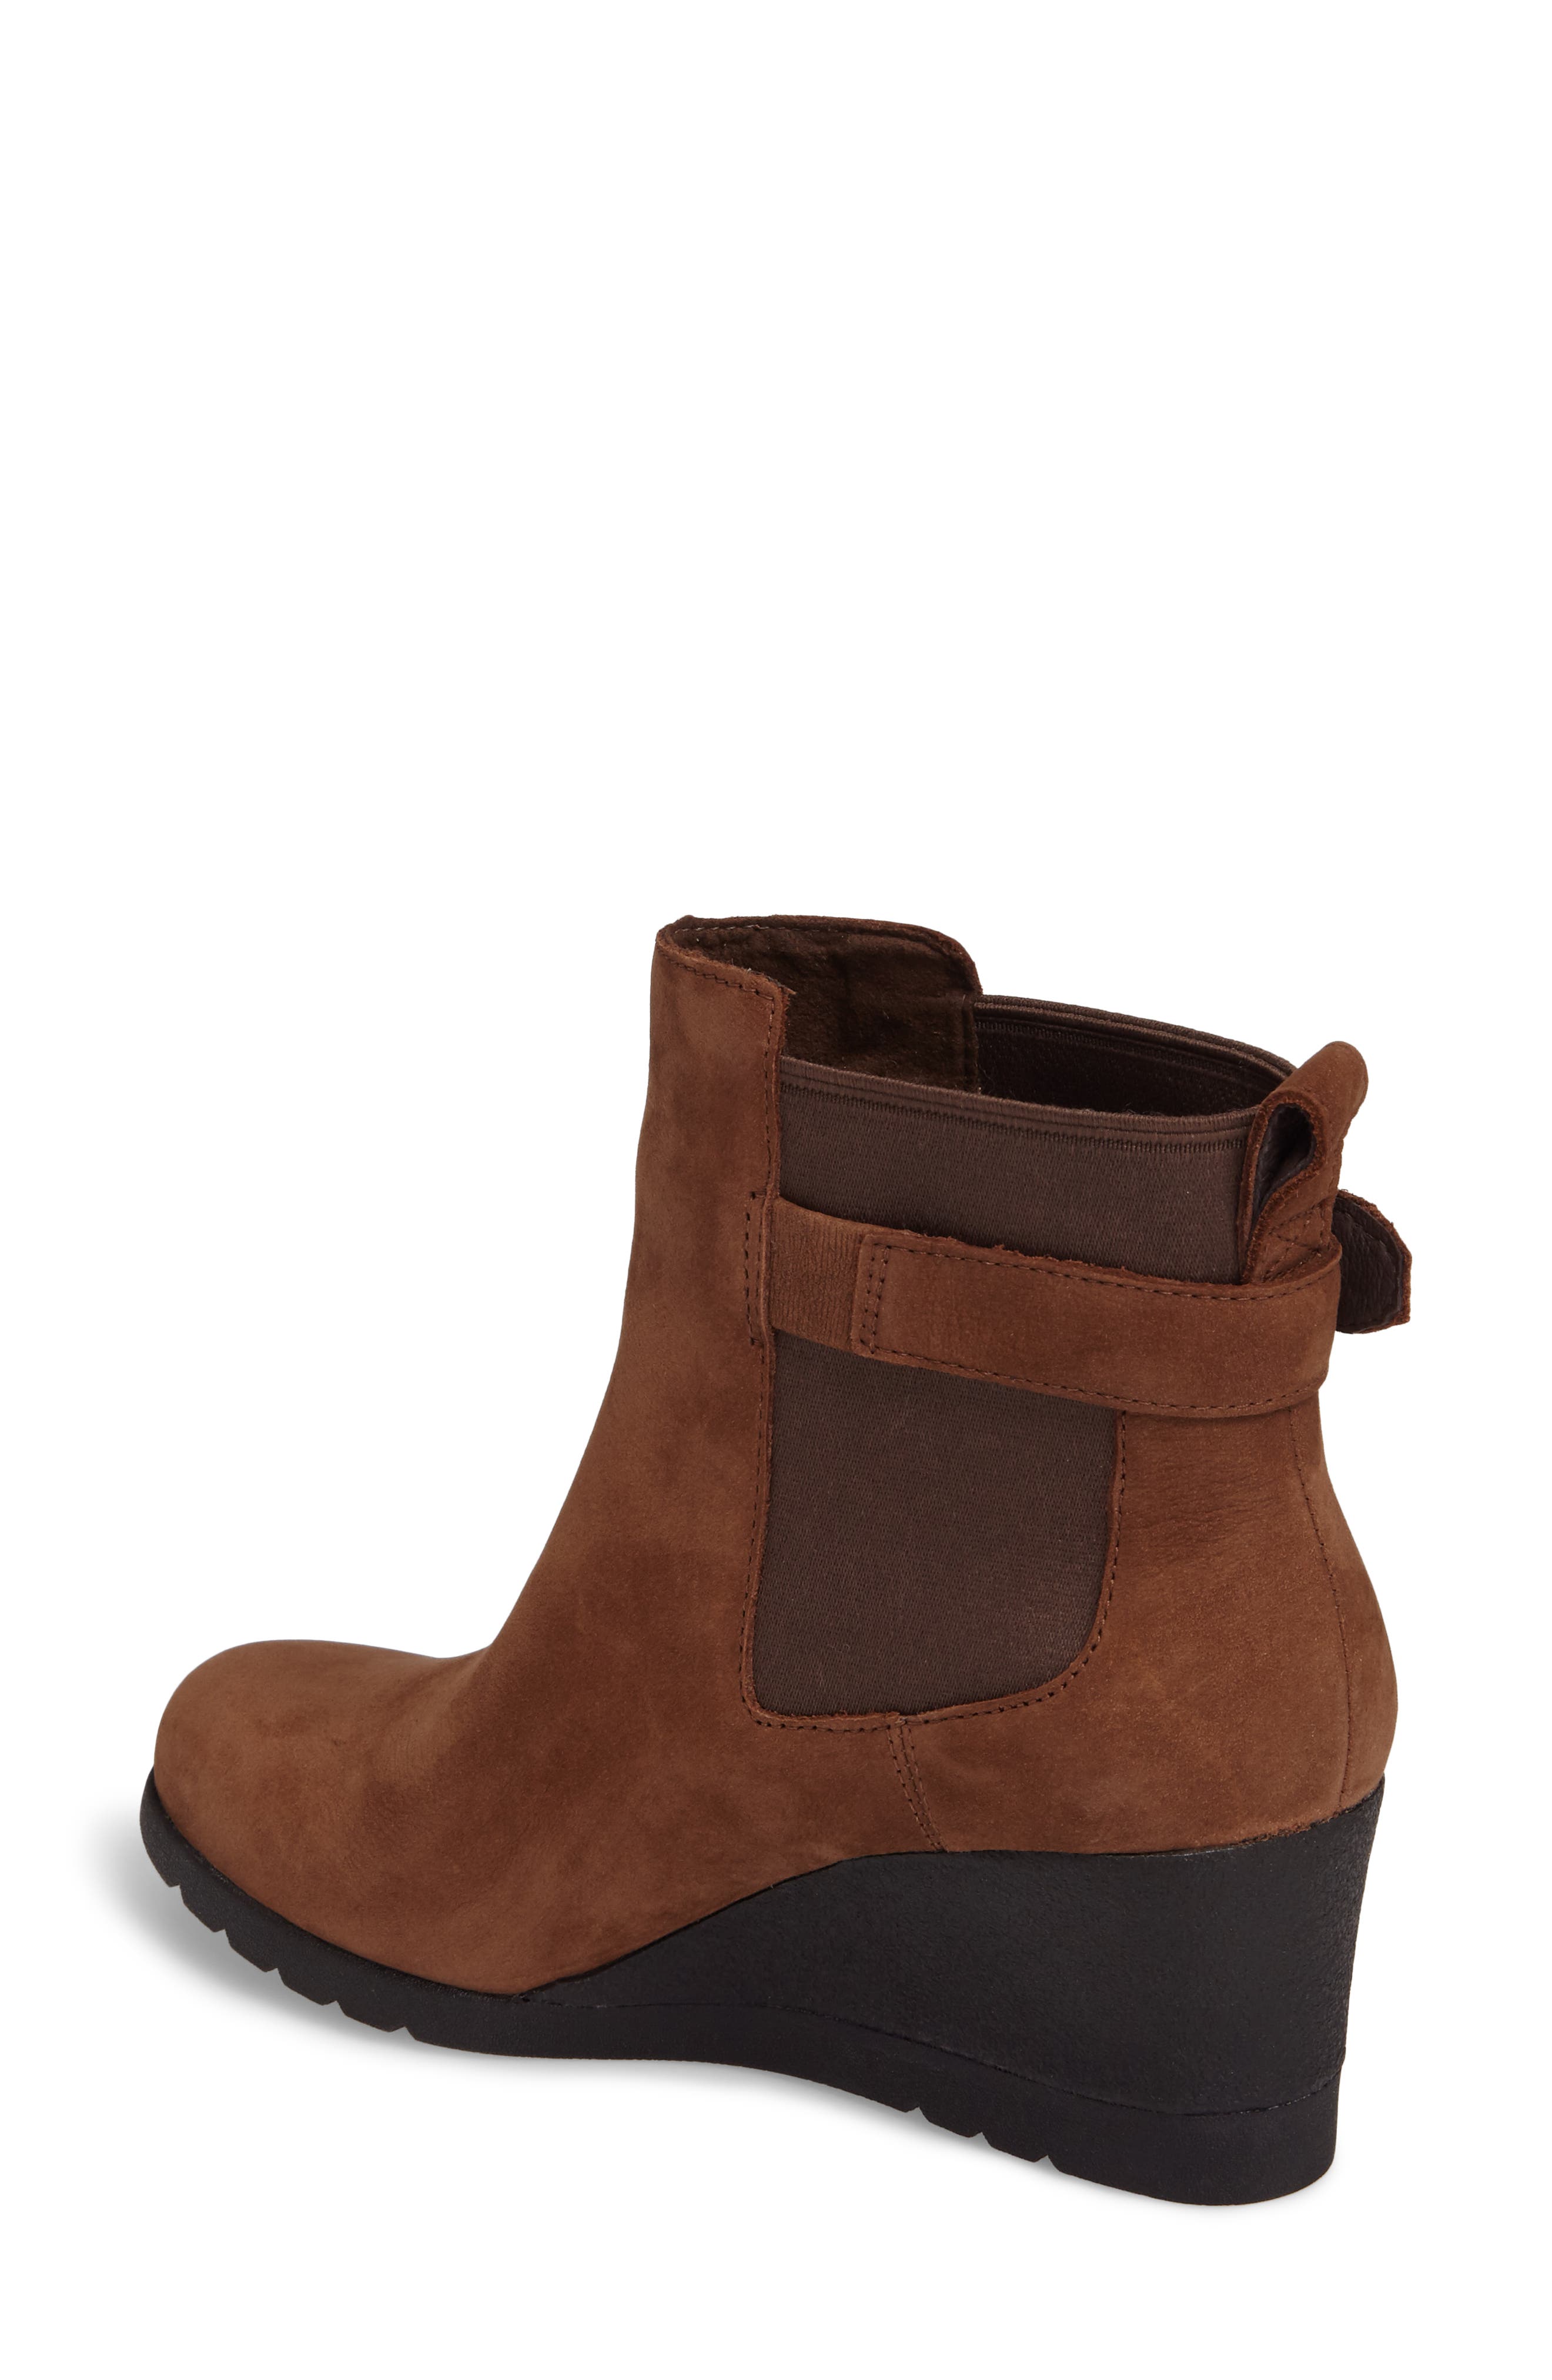 ugg indra wedge winter boot